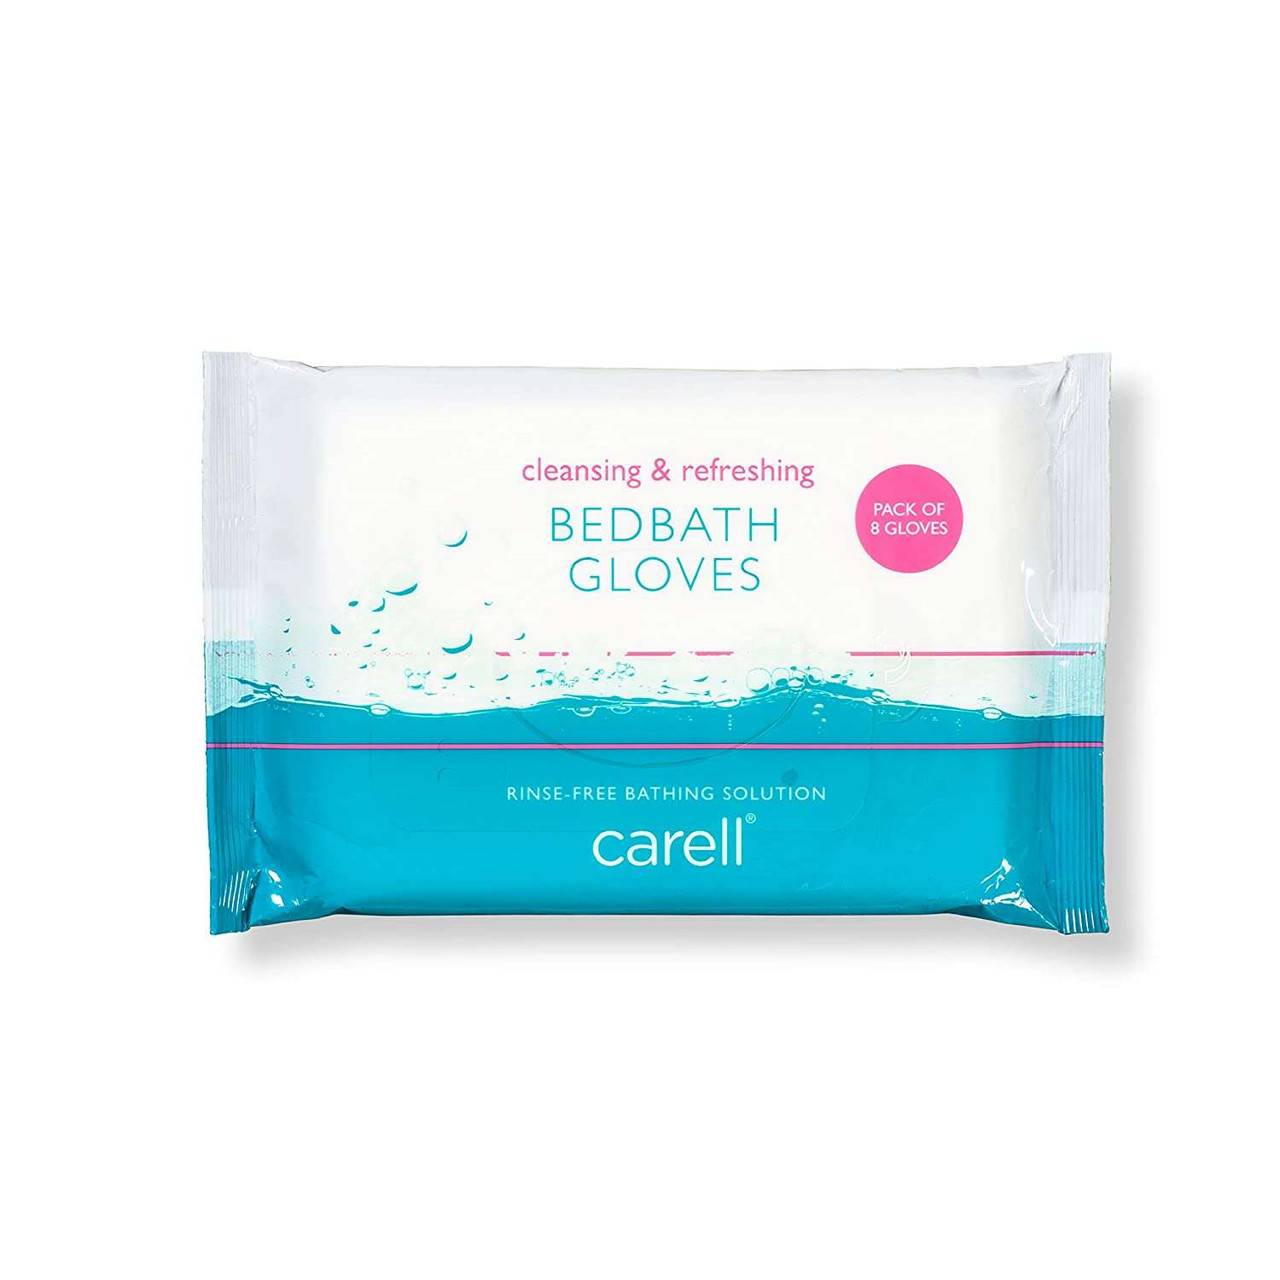 Carell Bed Bath Gloves Pack of 8 Gloves